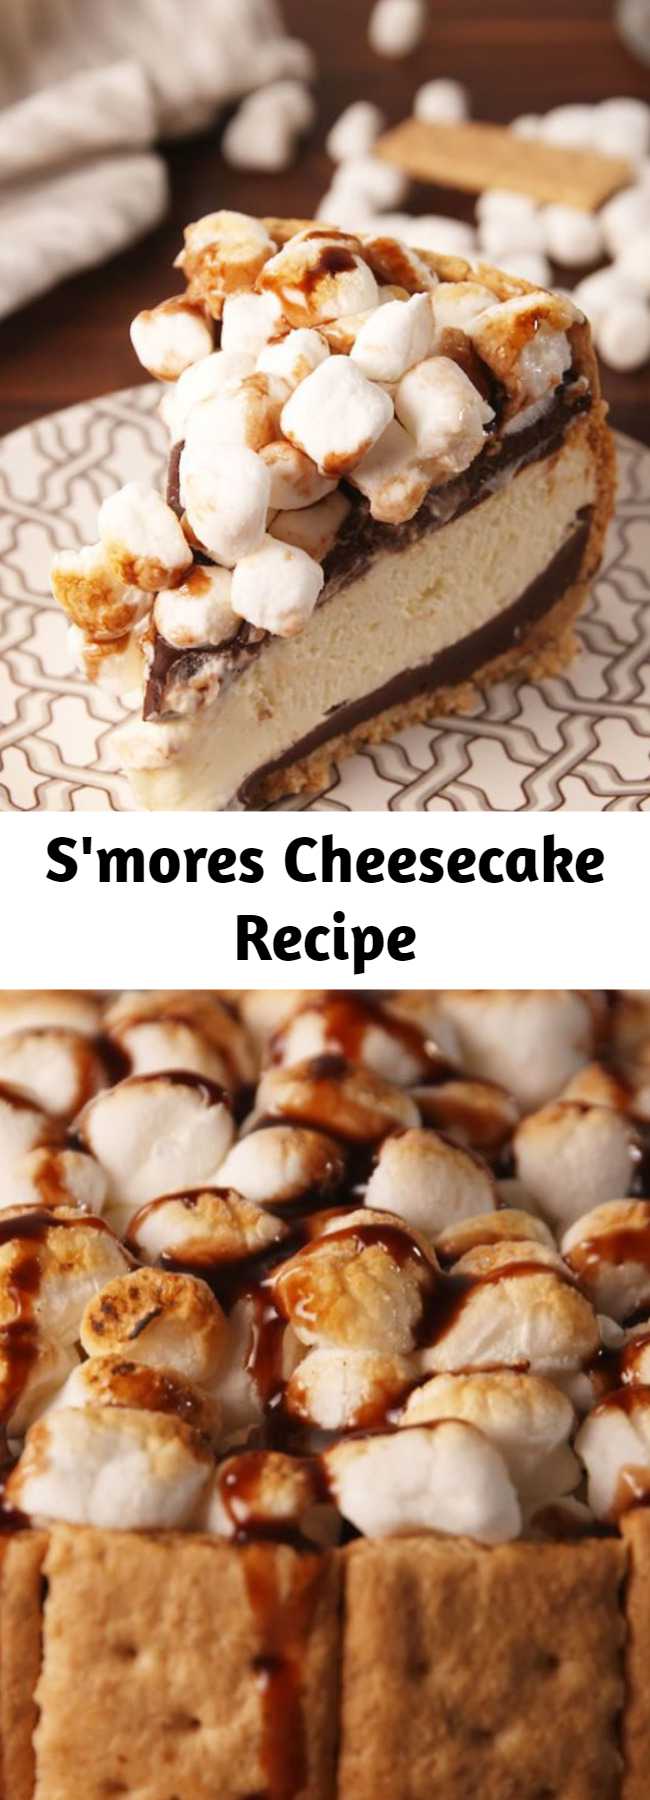 S'mores Cheesecake Recipe - S'mores make everything better, even cheesecake. Take the camping party indoors with this s'mores cheesecake.